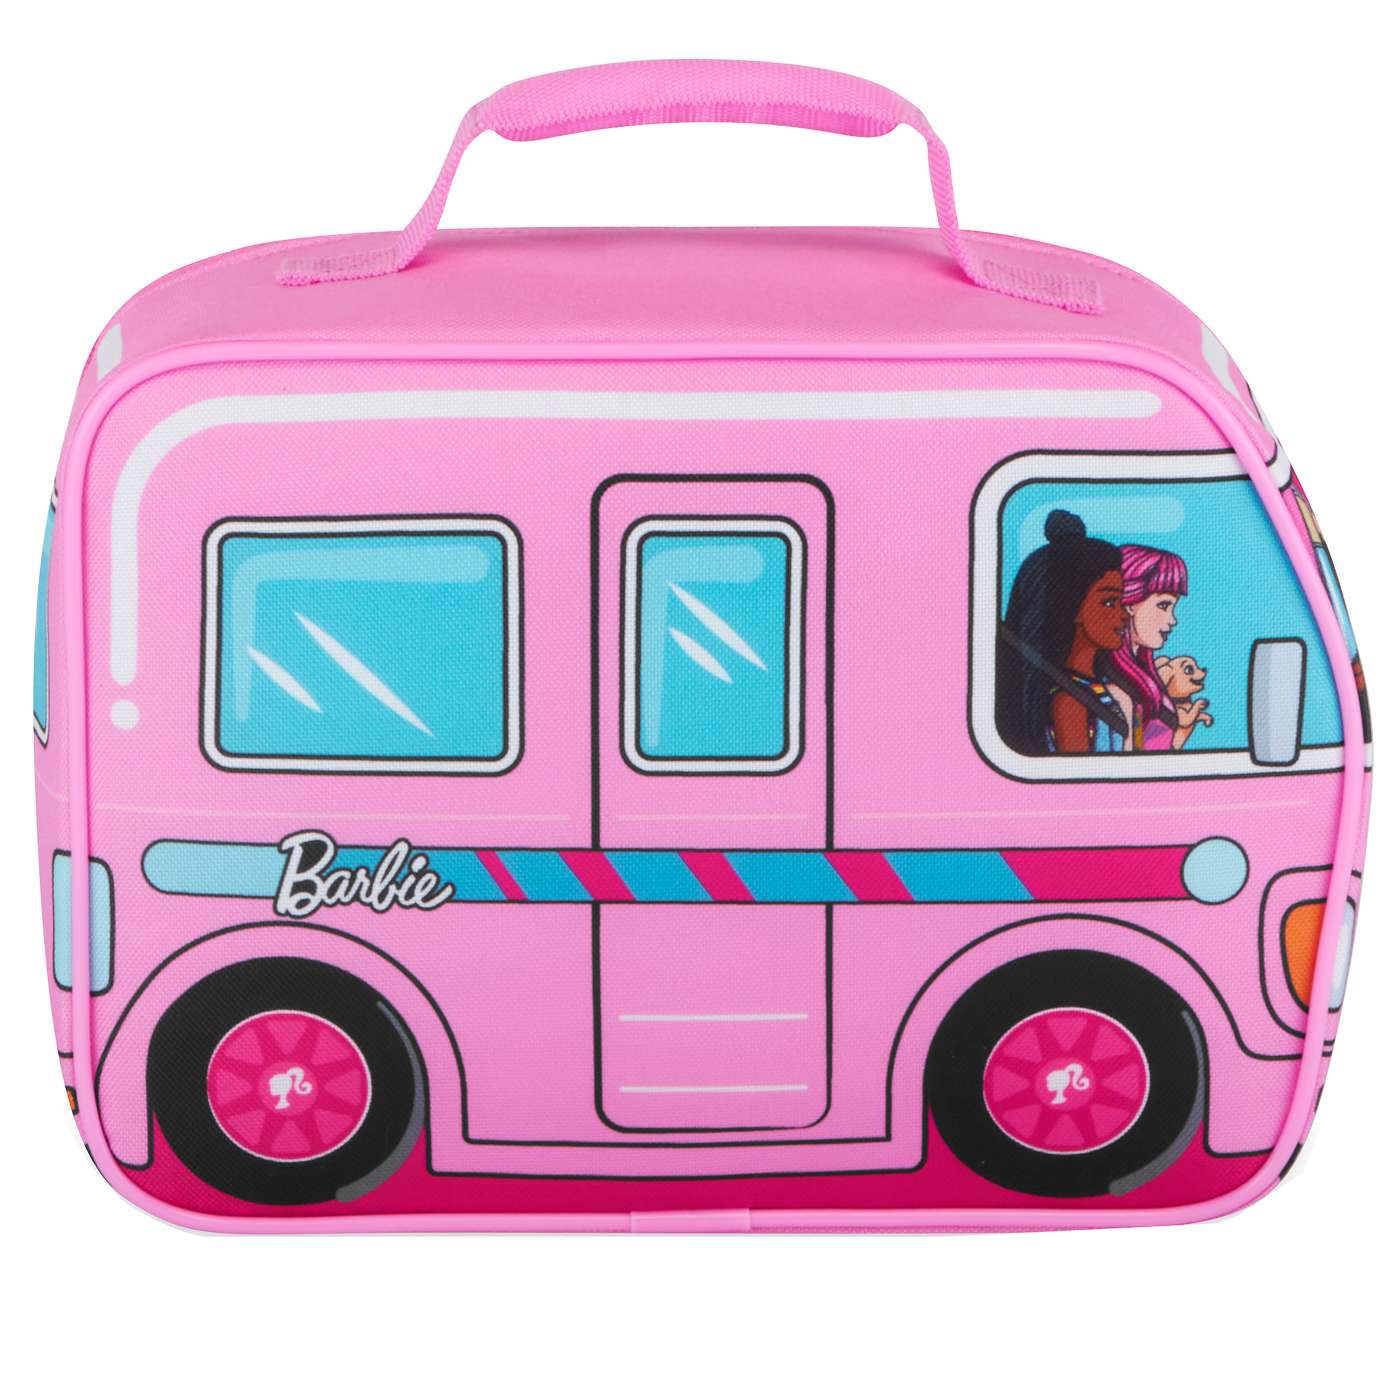 Barbie Lunch Box - baby & kid stuff - by owner - household sale - craigslist